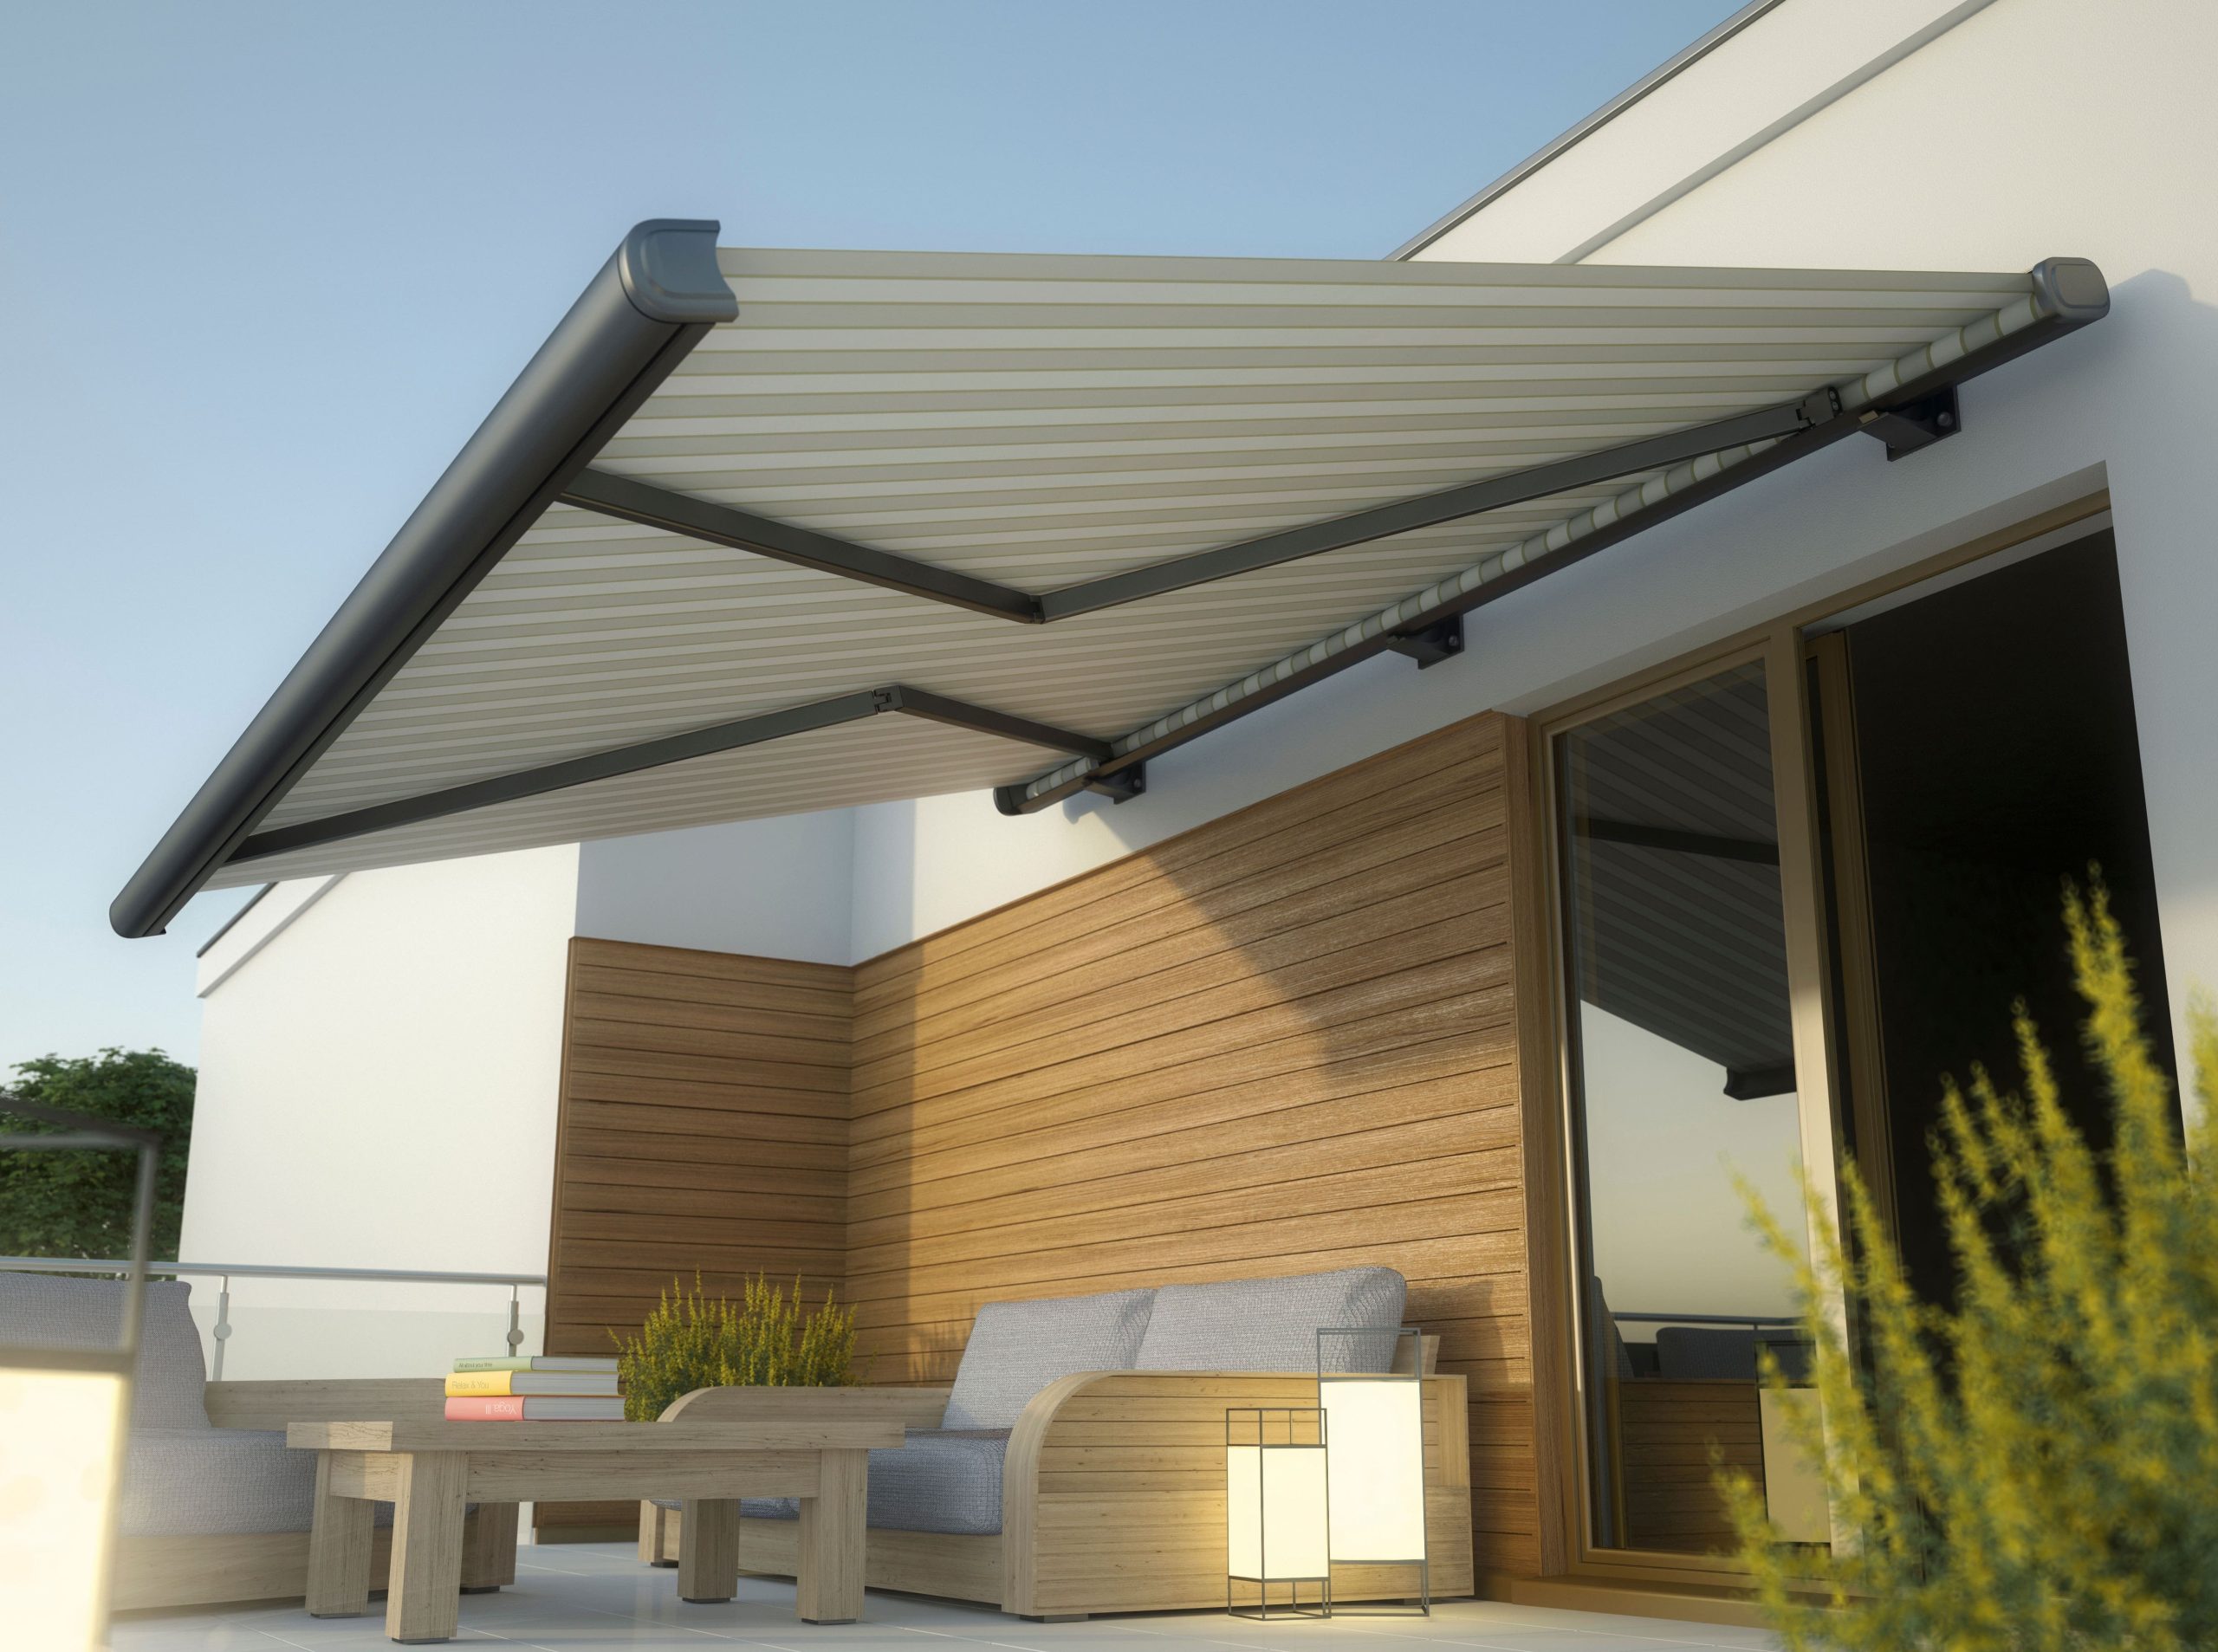 Convenient retracable awning for outdoor space in Shreveport, LA.